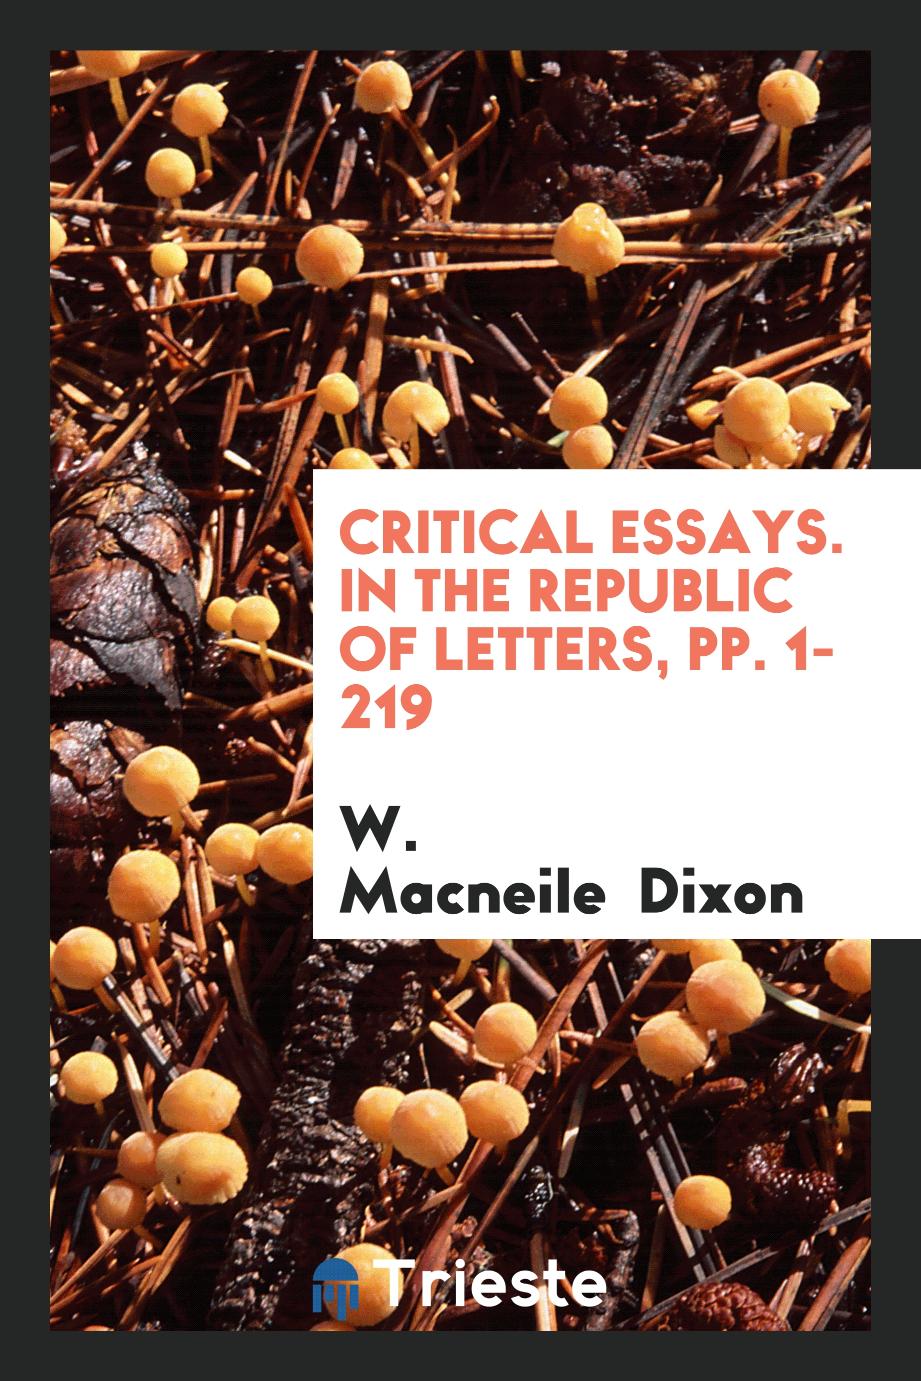 Critical Essays. In the Republic of Letters, pp. 1-219